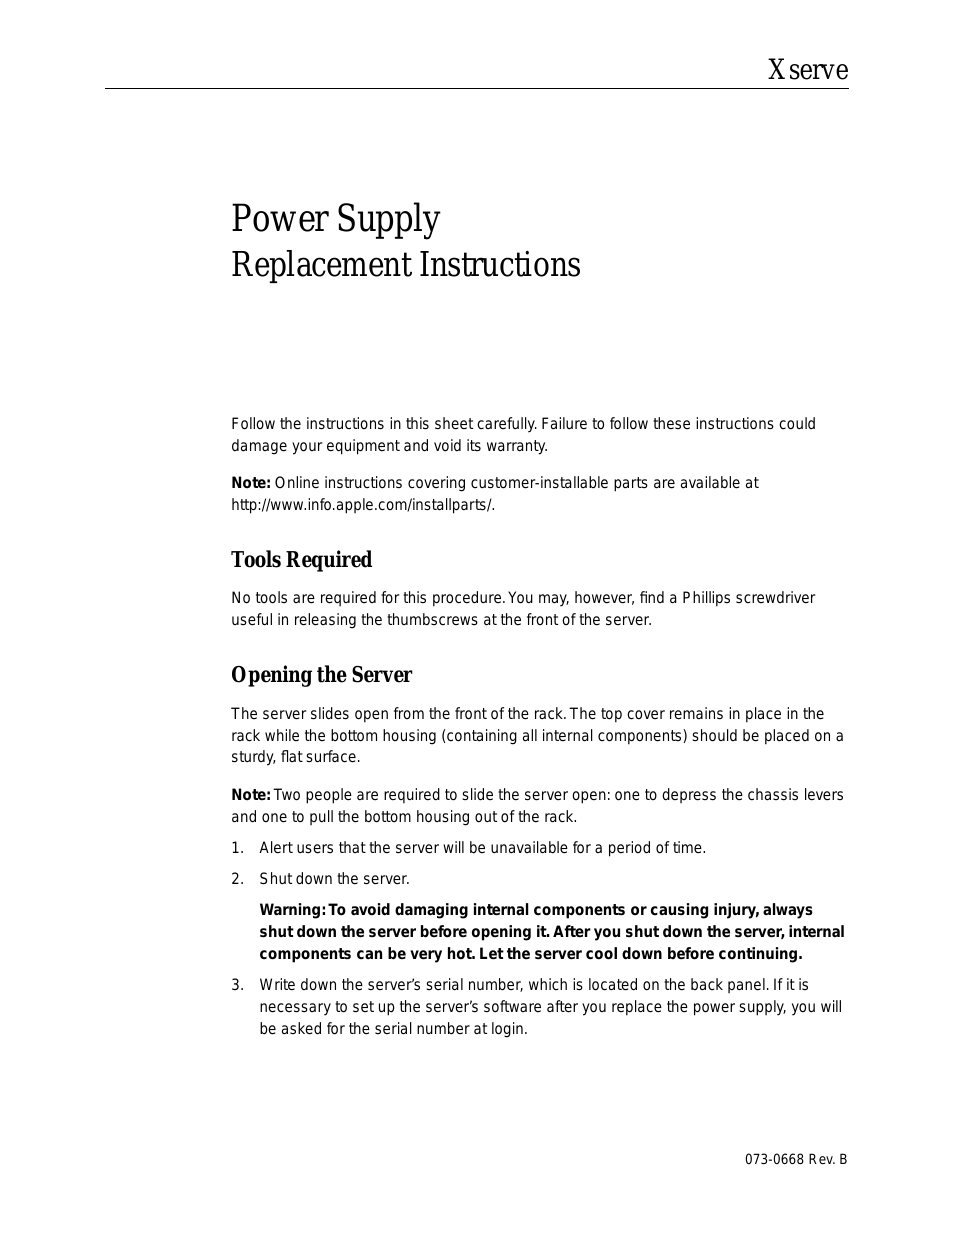 Xserve (Power Supply Replacement)